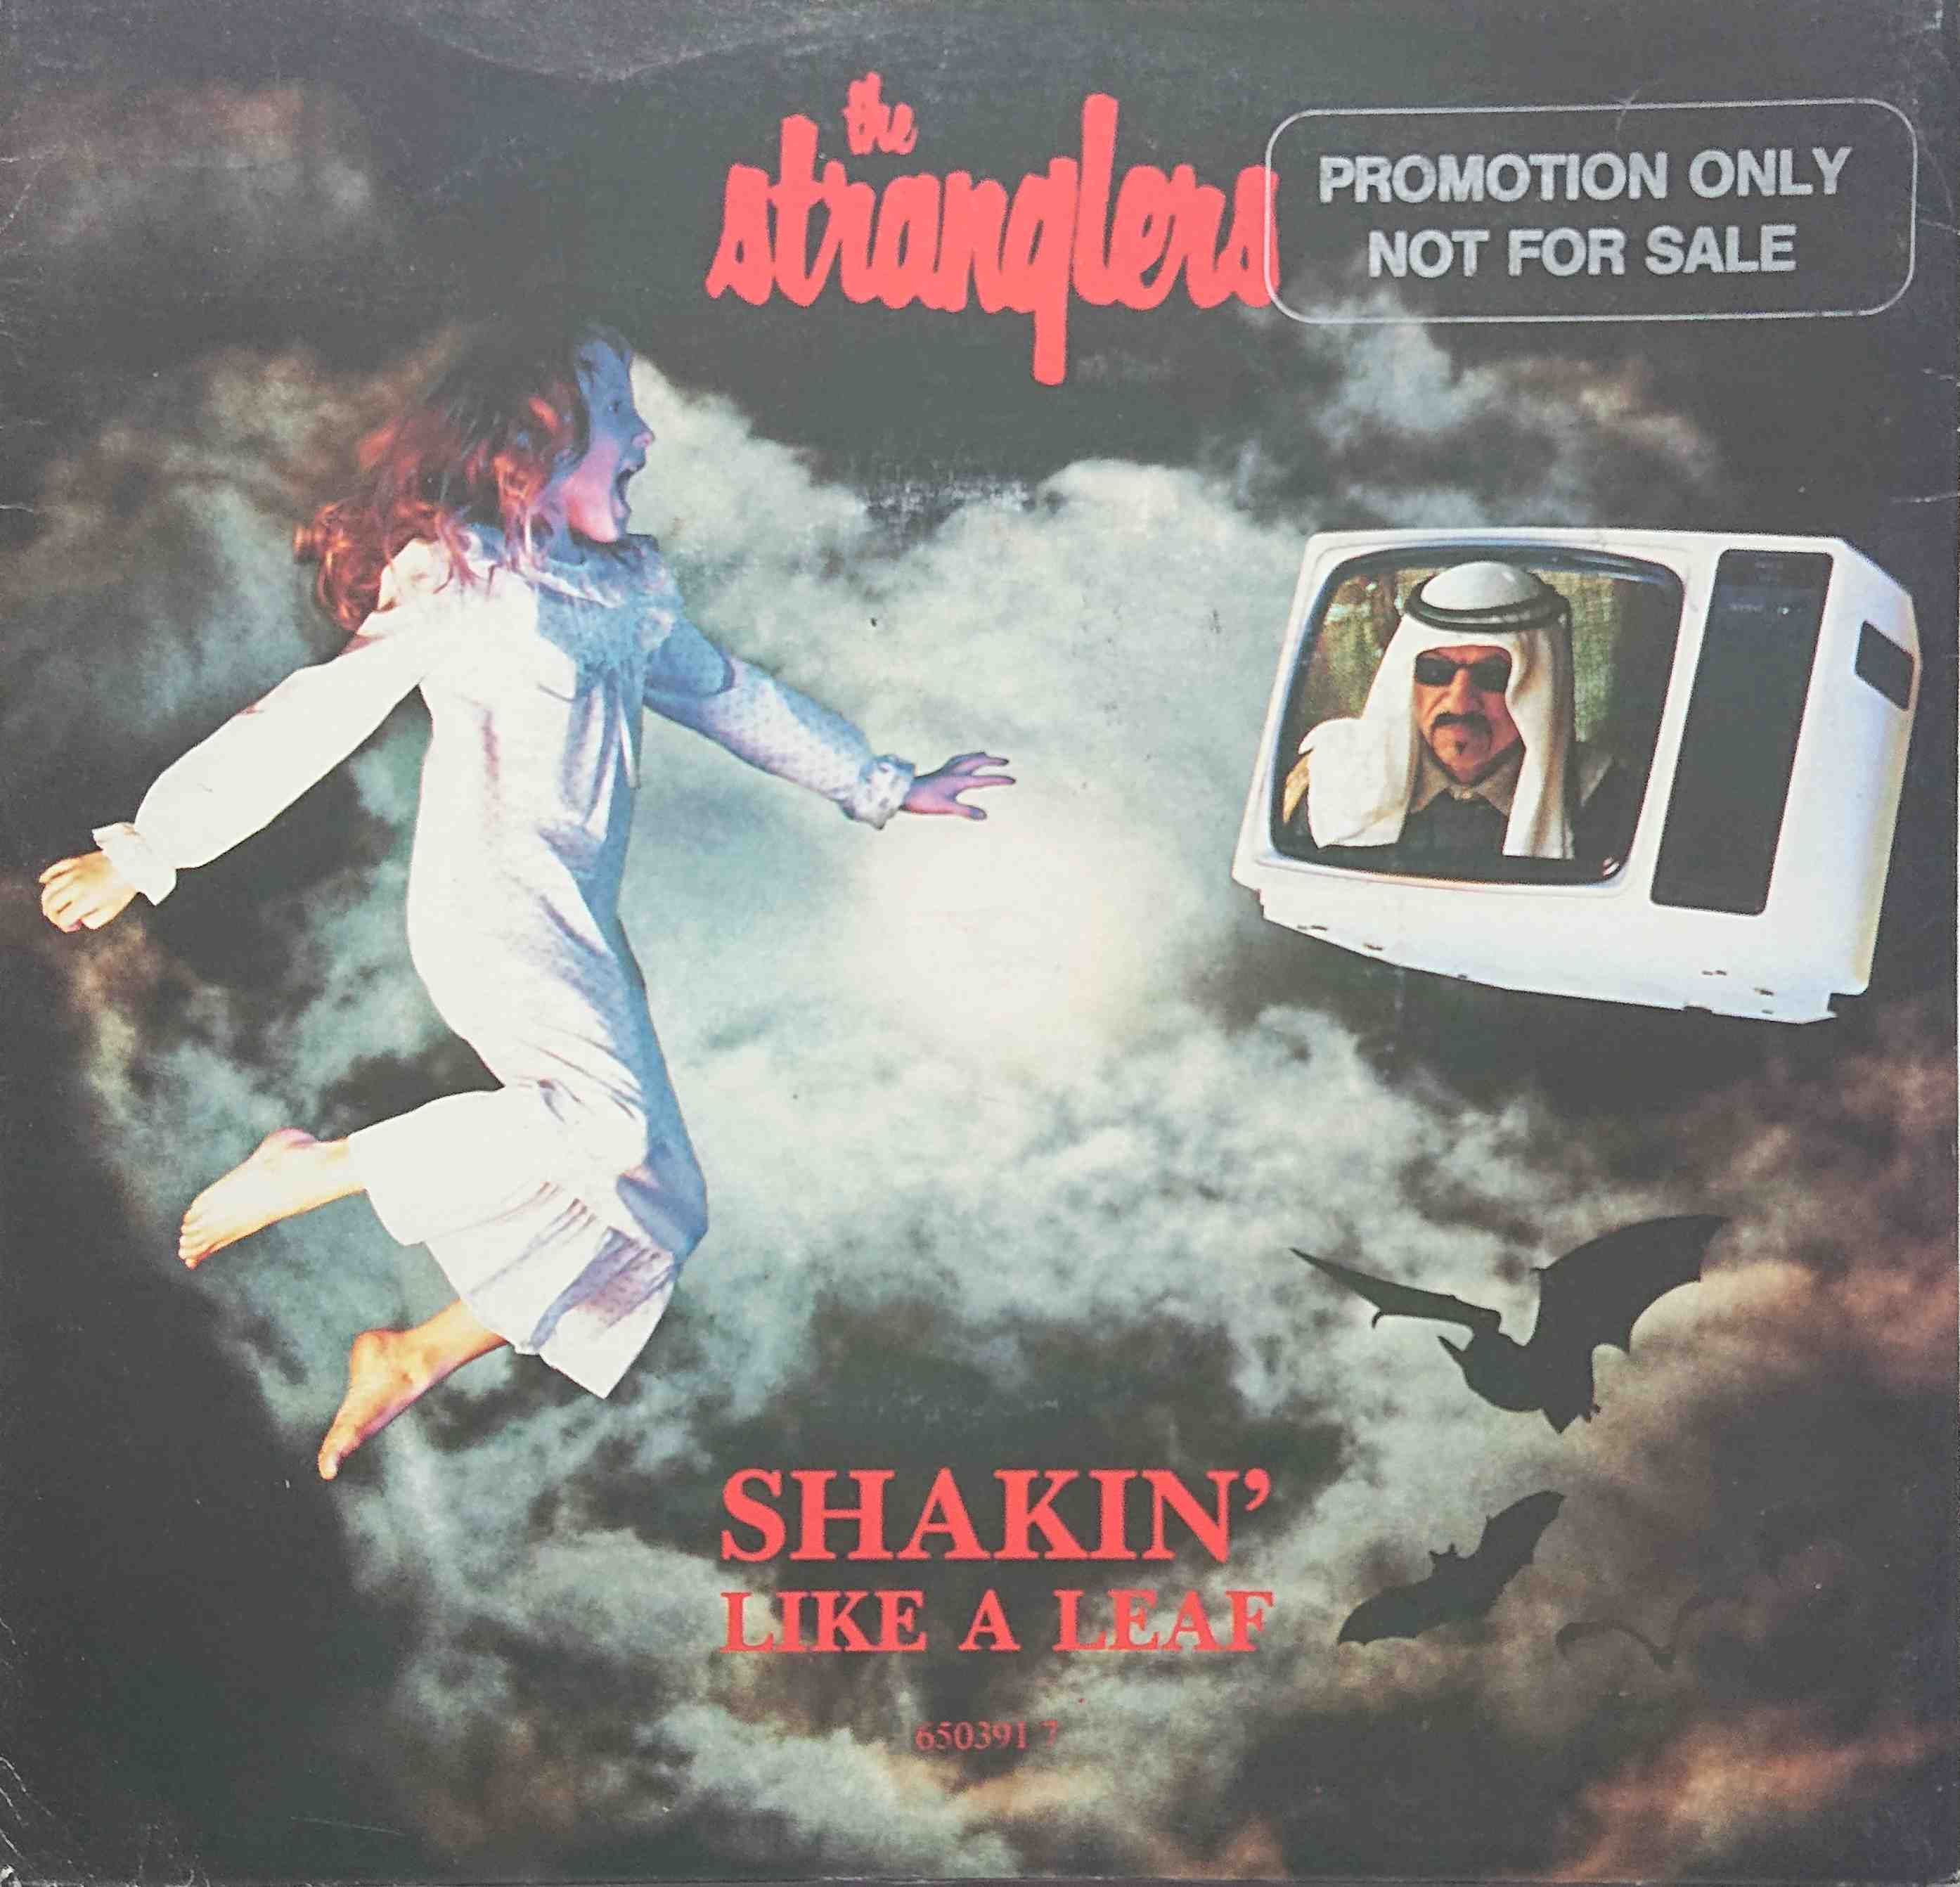 Picture of Shakin' like a leaf by artist The Stranglers from The Stranglers singles